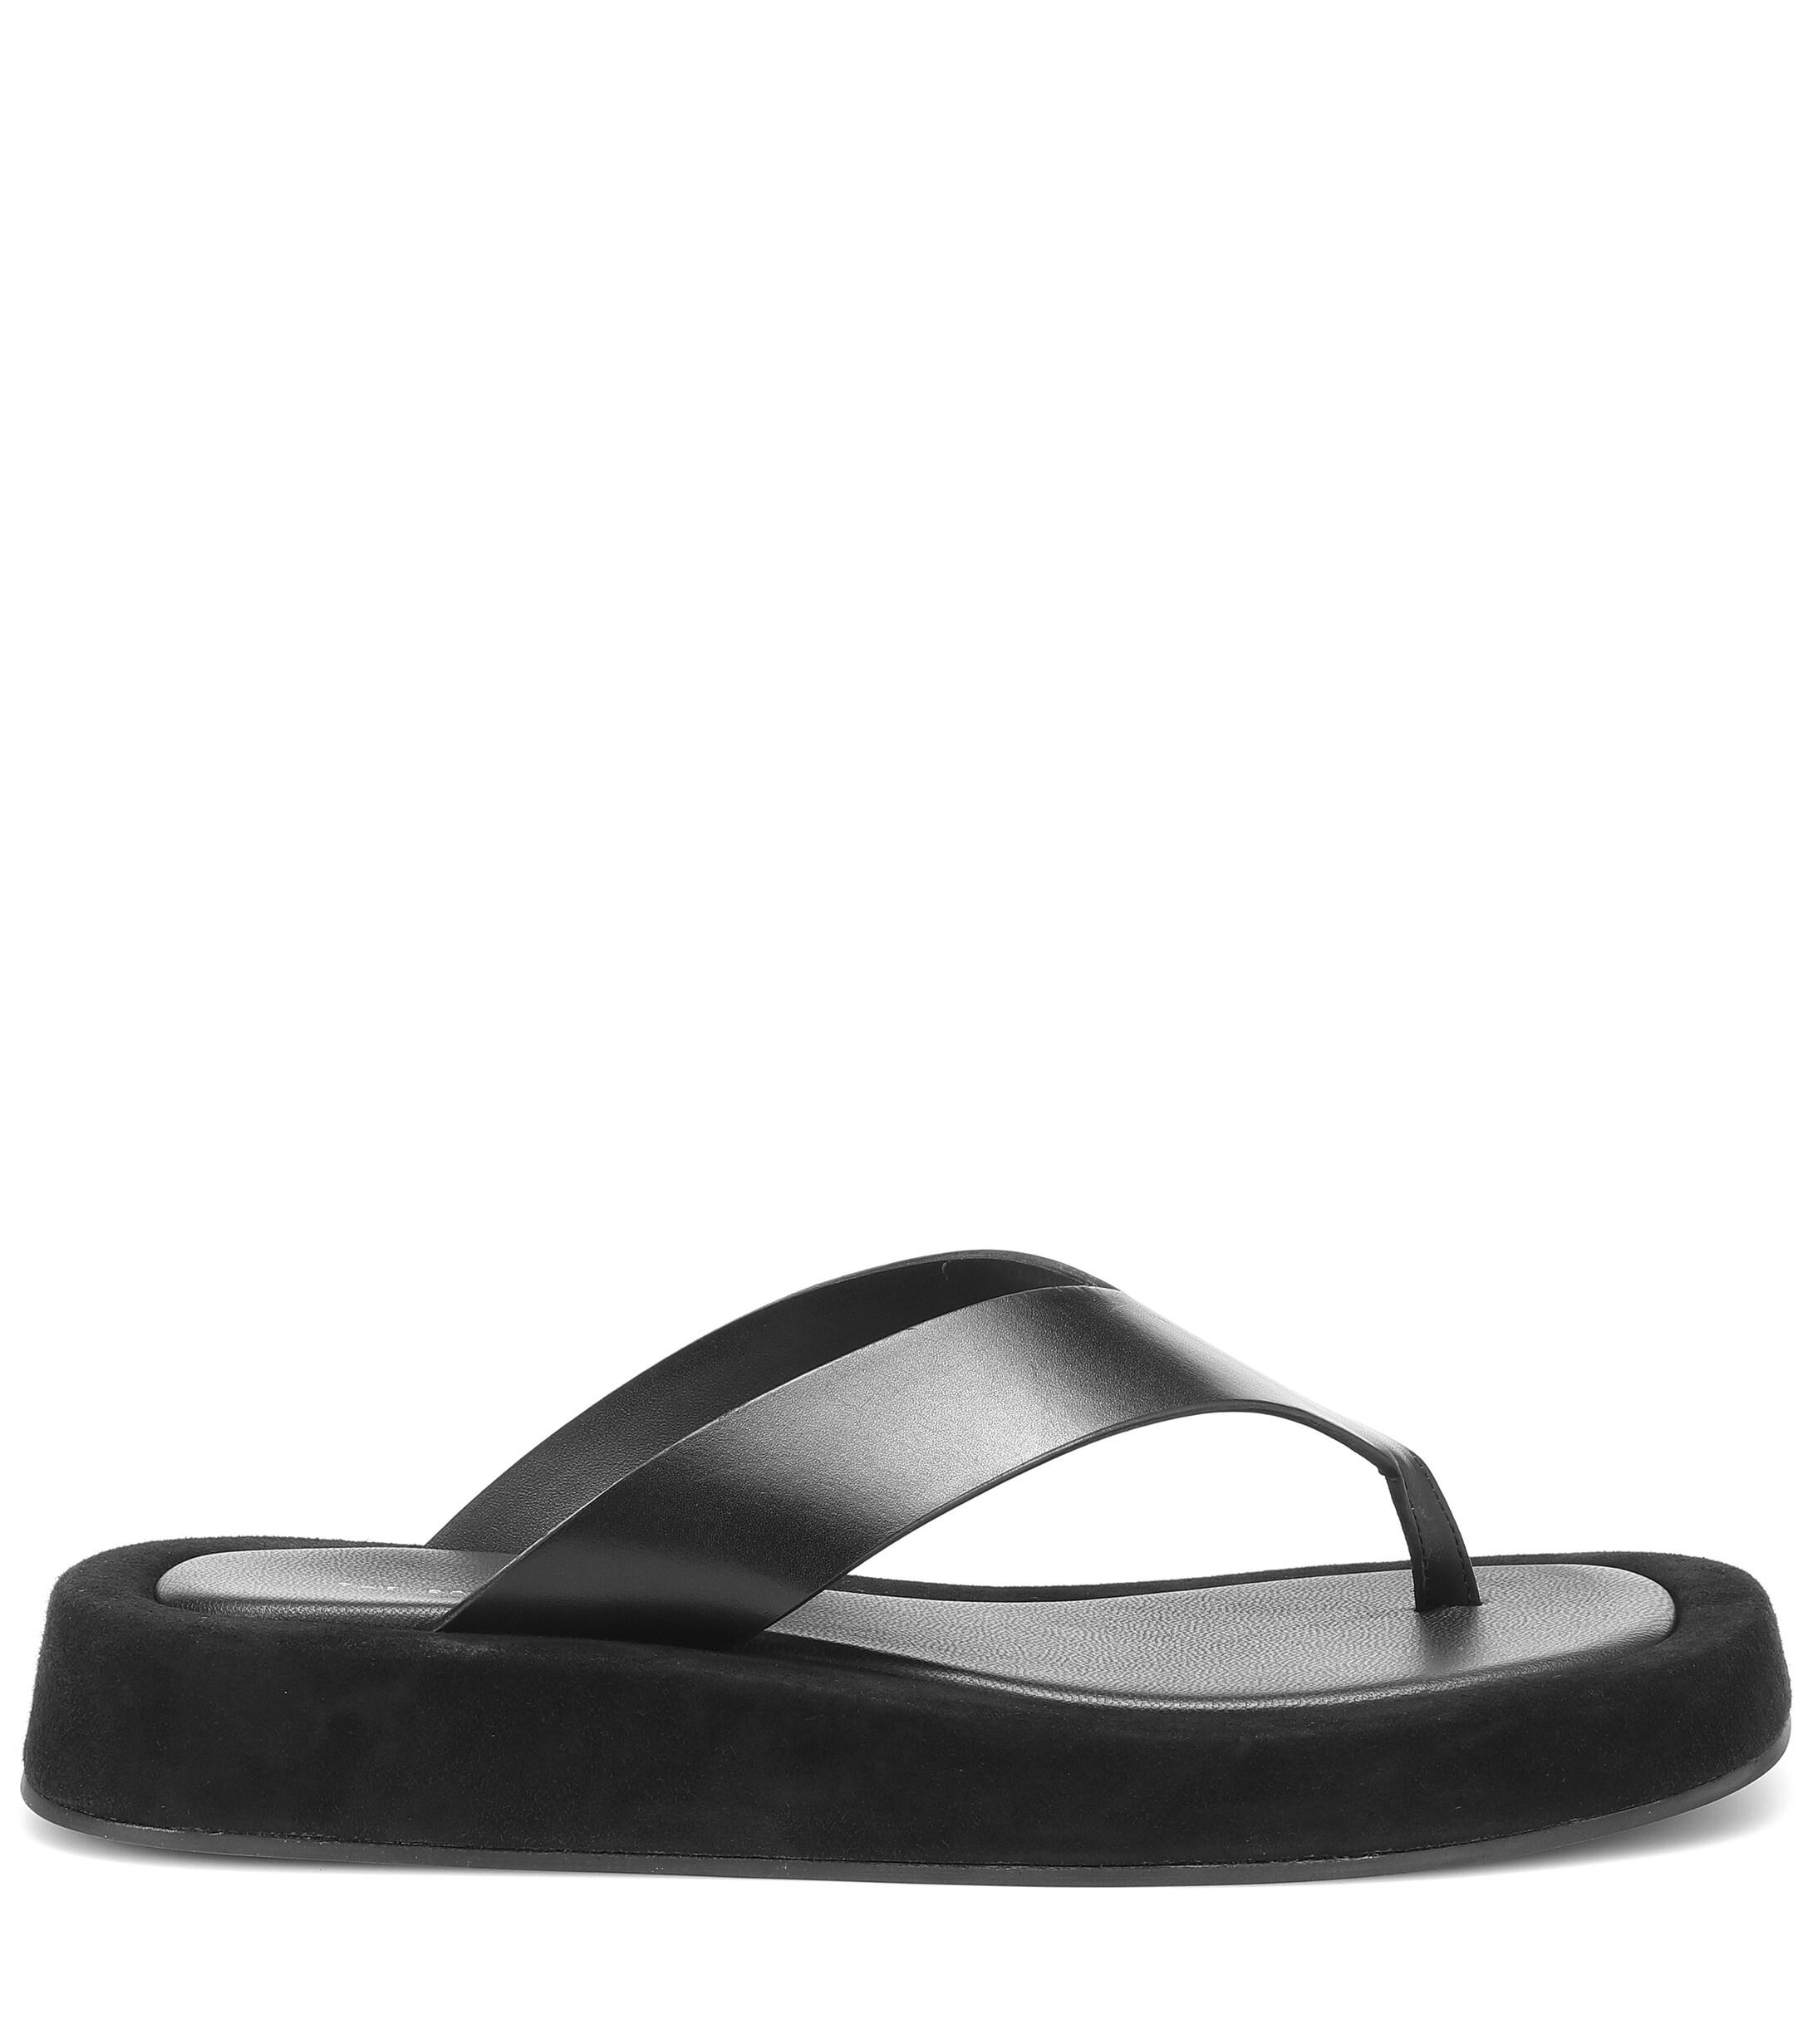 The Row Ginza Leather And Suede Sandals in Black-Black (Black) - Lyst